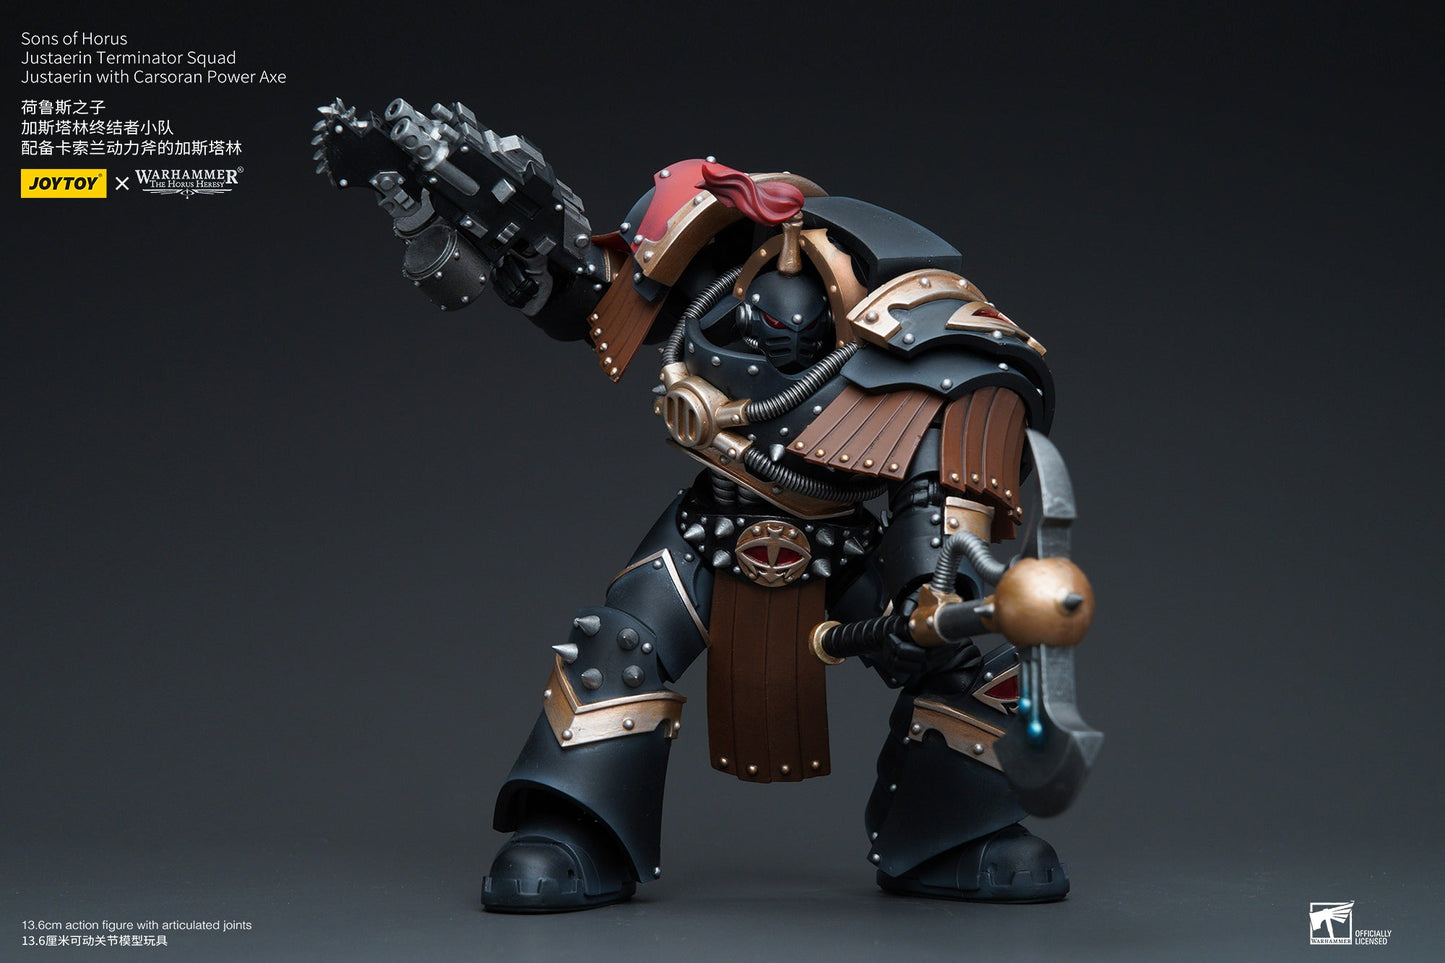 Sons of Horus Justaerin Terminator Squad Justaerin with Carsoran Power Axe - Warhammer "The Horus Heresy" Action Figure By JOYTOY